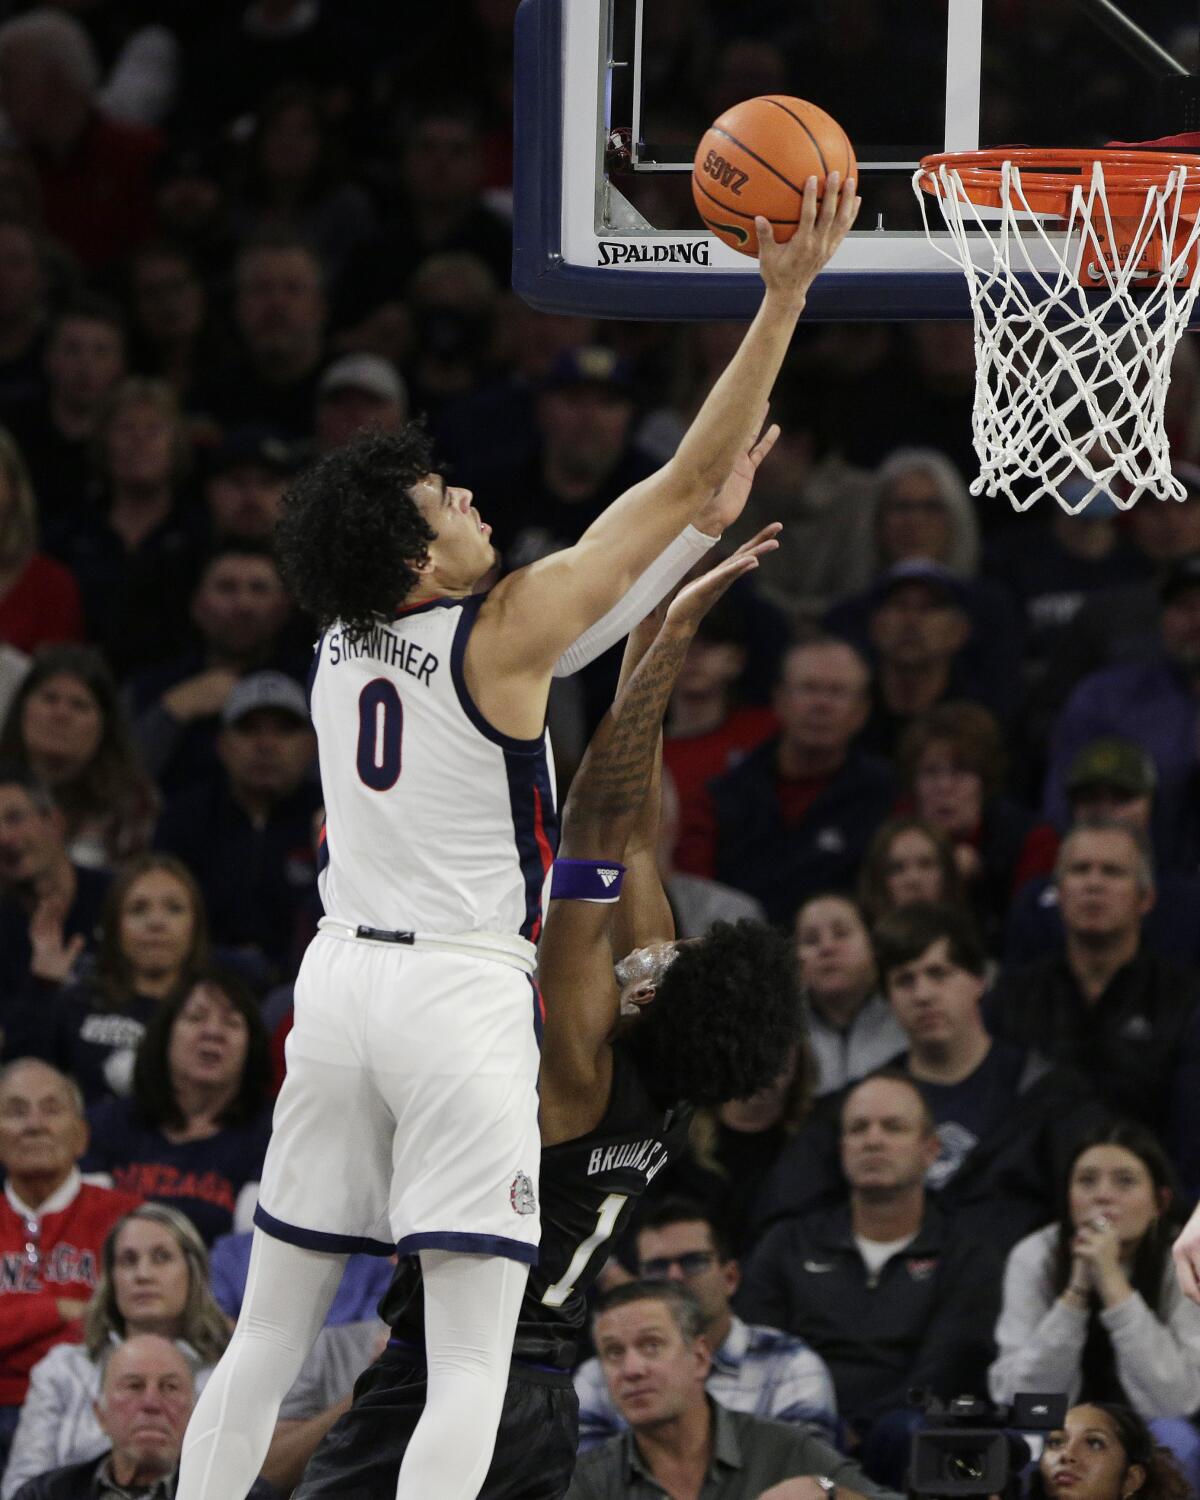 Gonzaga guard Julian Strawther (0) shoots while defended by Washington forward Keion Brooks (1) during the first half of an NCAA college basketball game, Friday, Dec. 9, 2022, in Spokane, Wash. (AP Photo/Young Kwak)